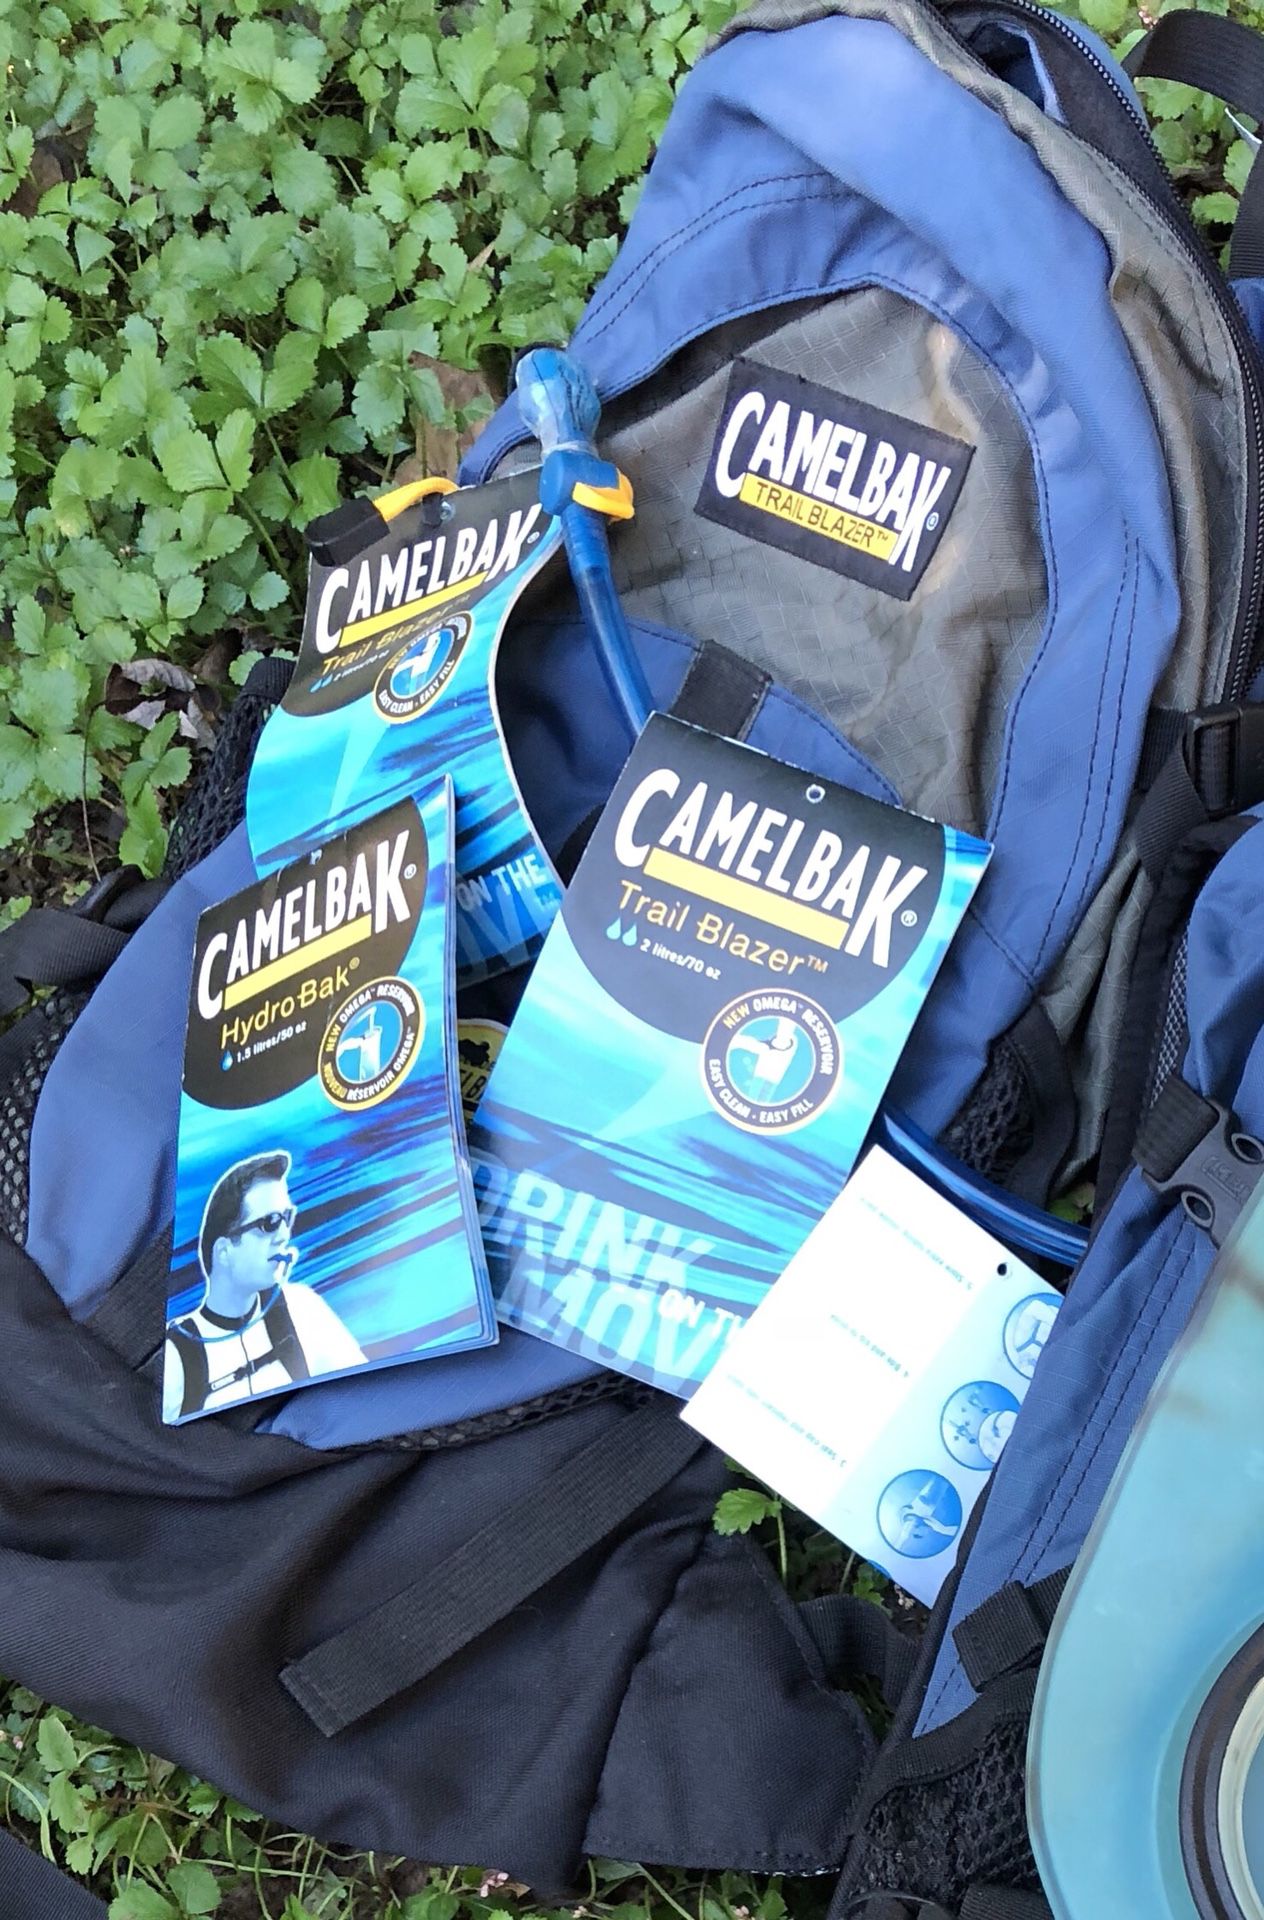 Two NEW Camelback water system backpacks: Trailblazer and Hydrobak.